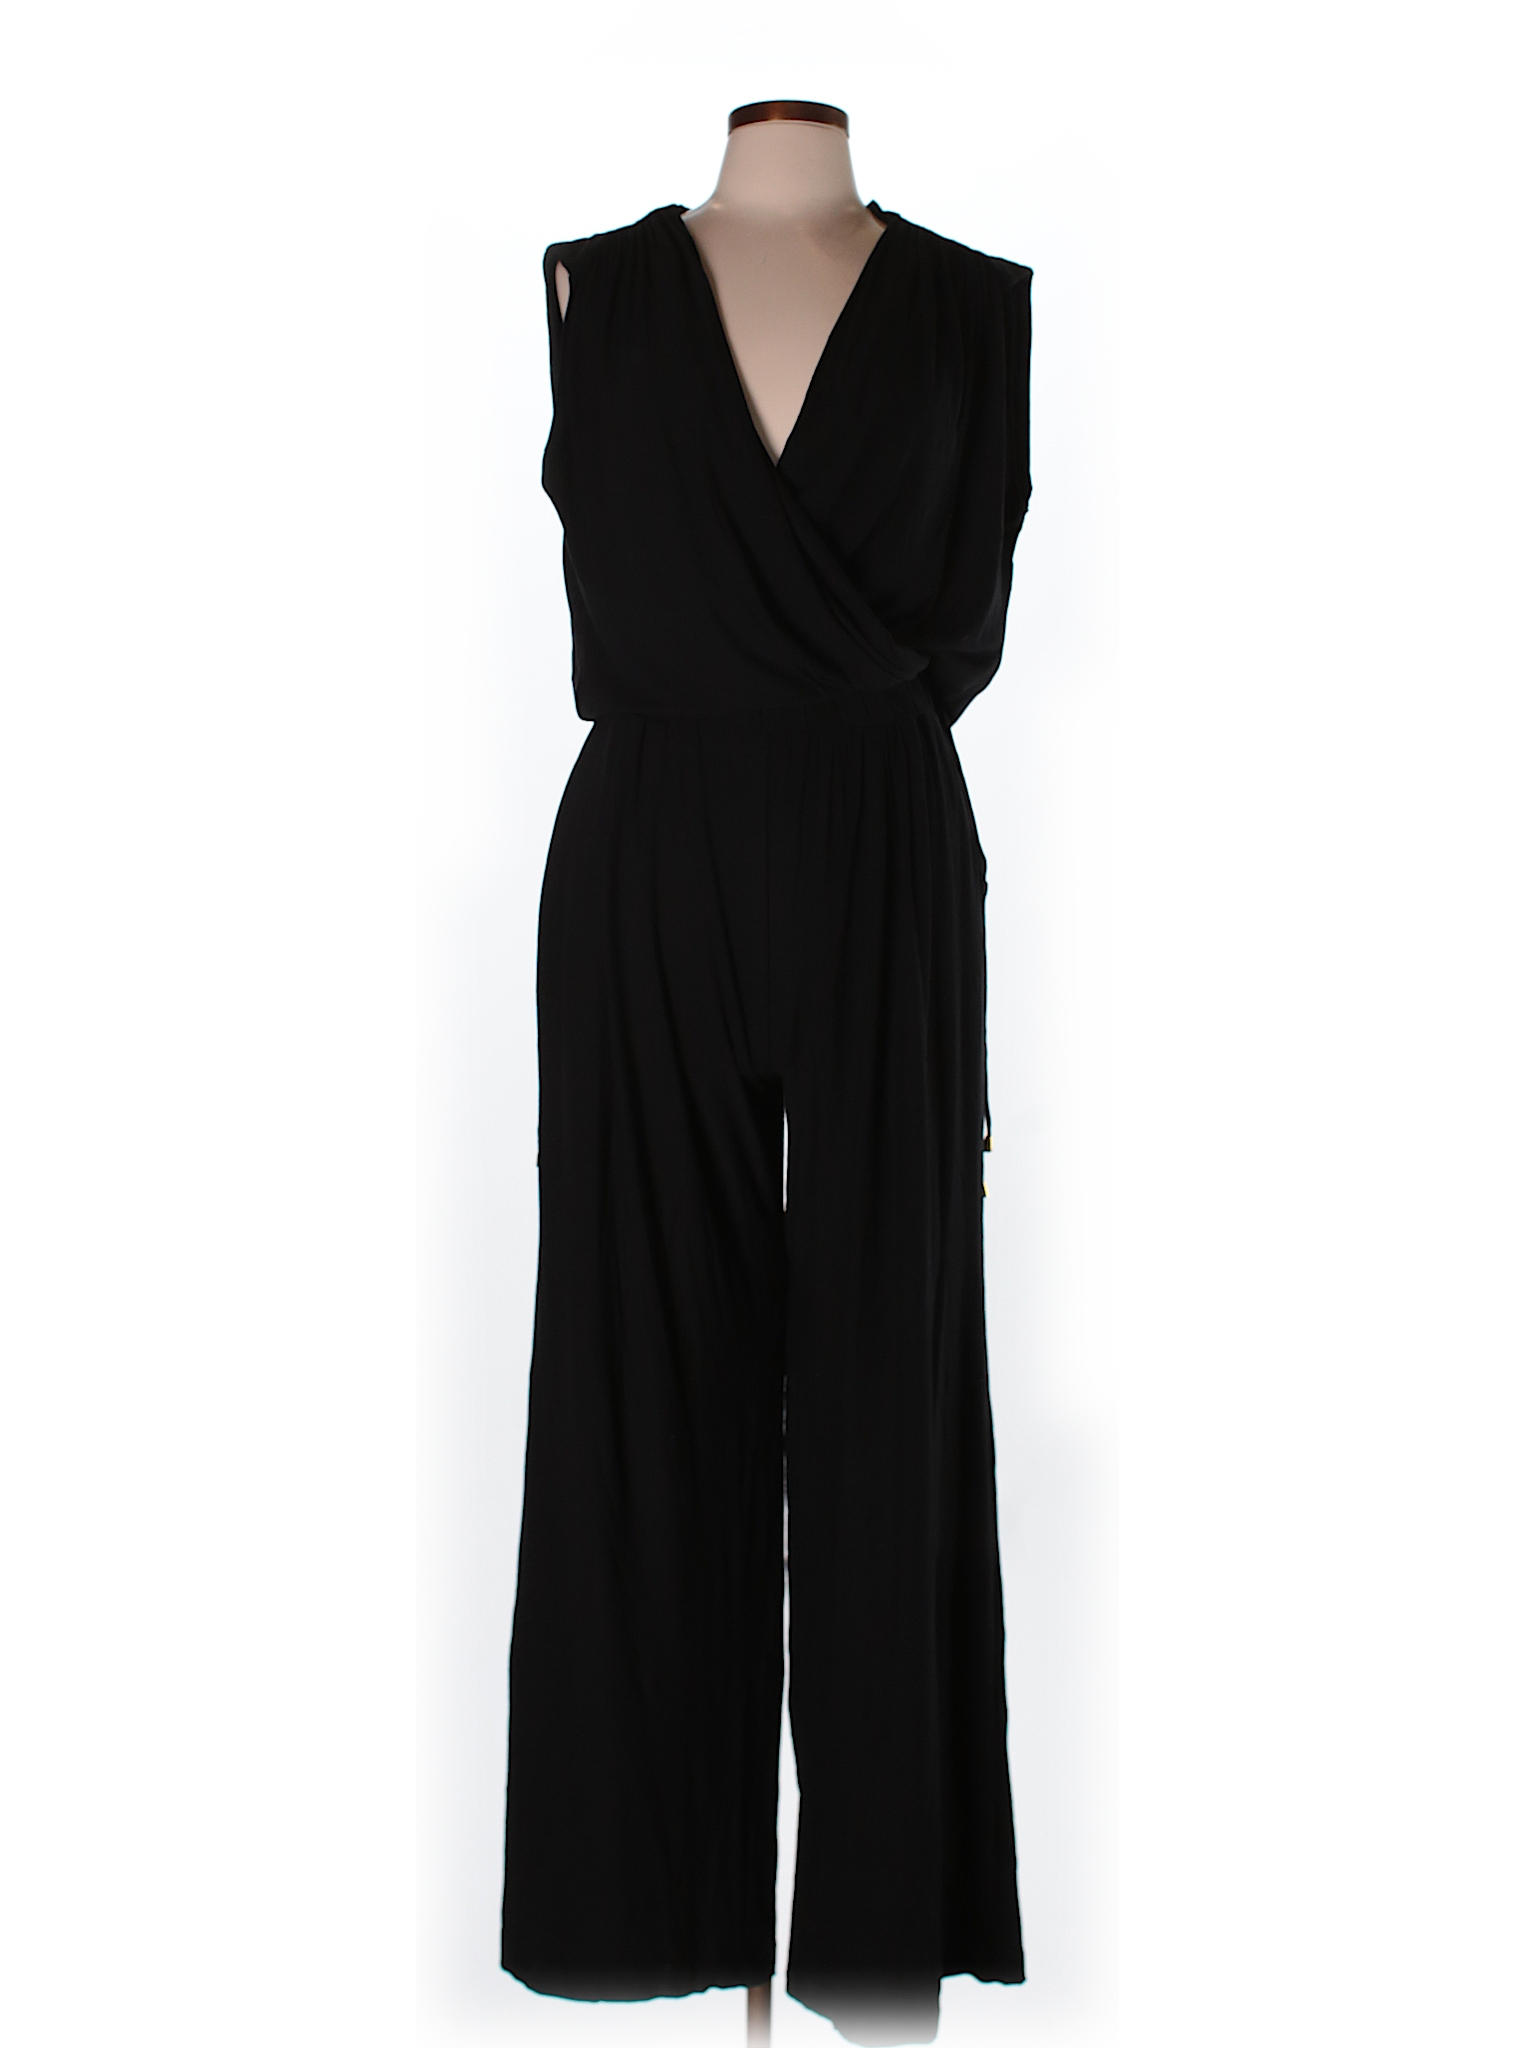 T Bags Los Angeles Jumpsuit - 73% off only on thredUP